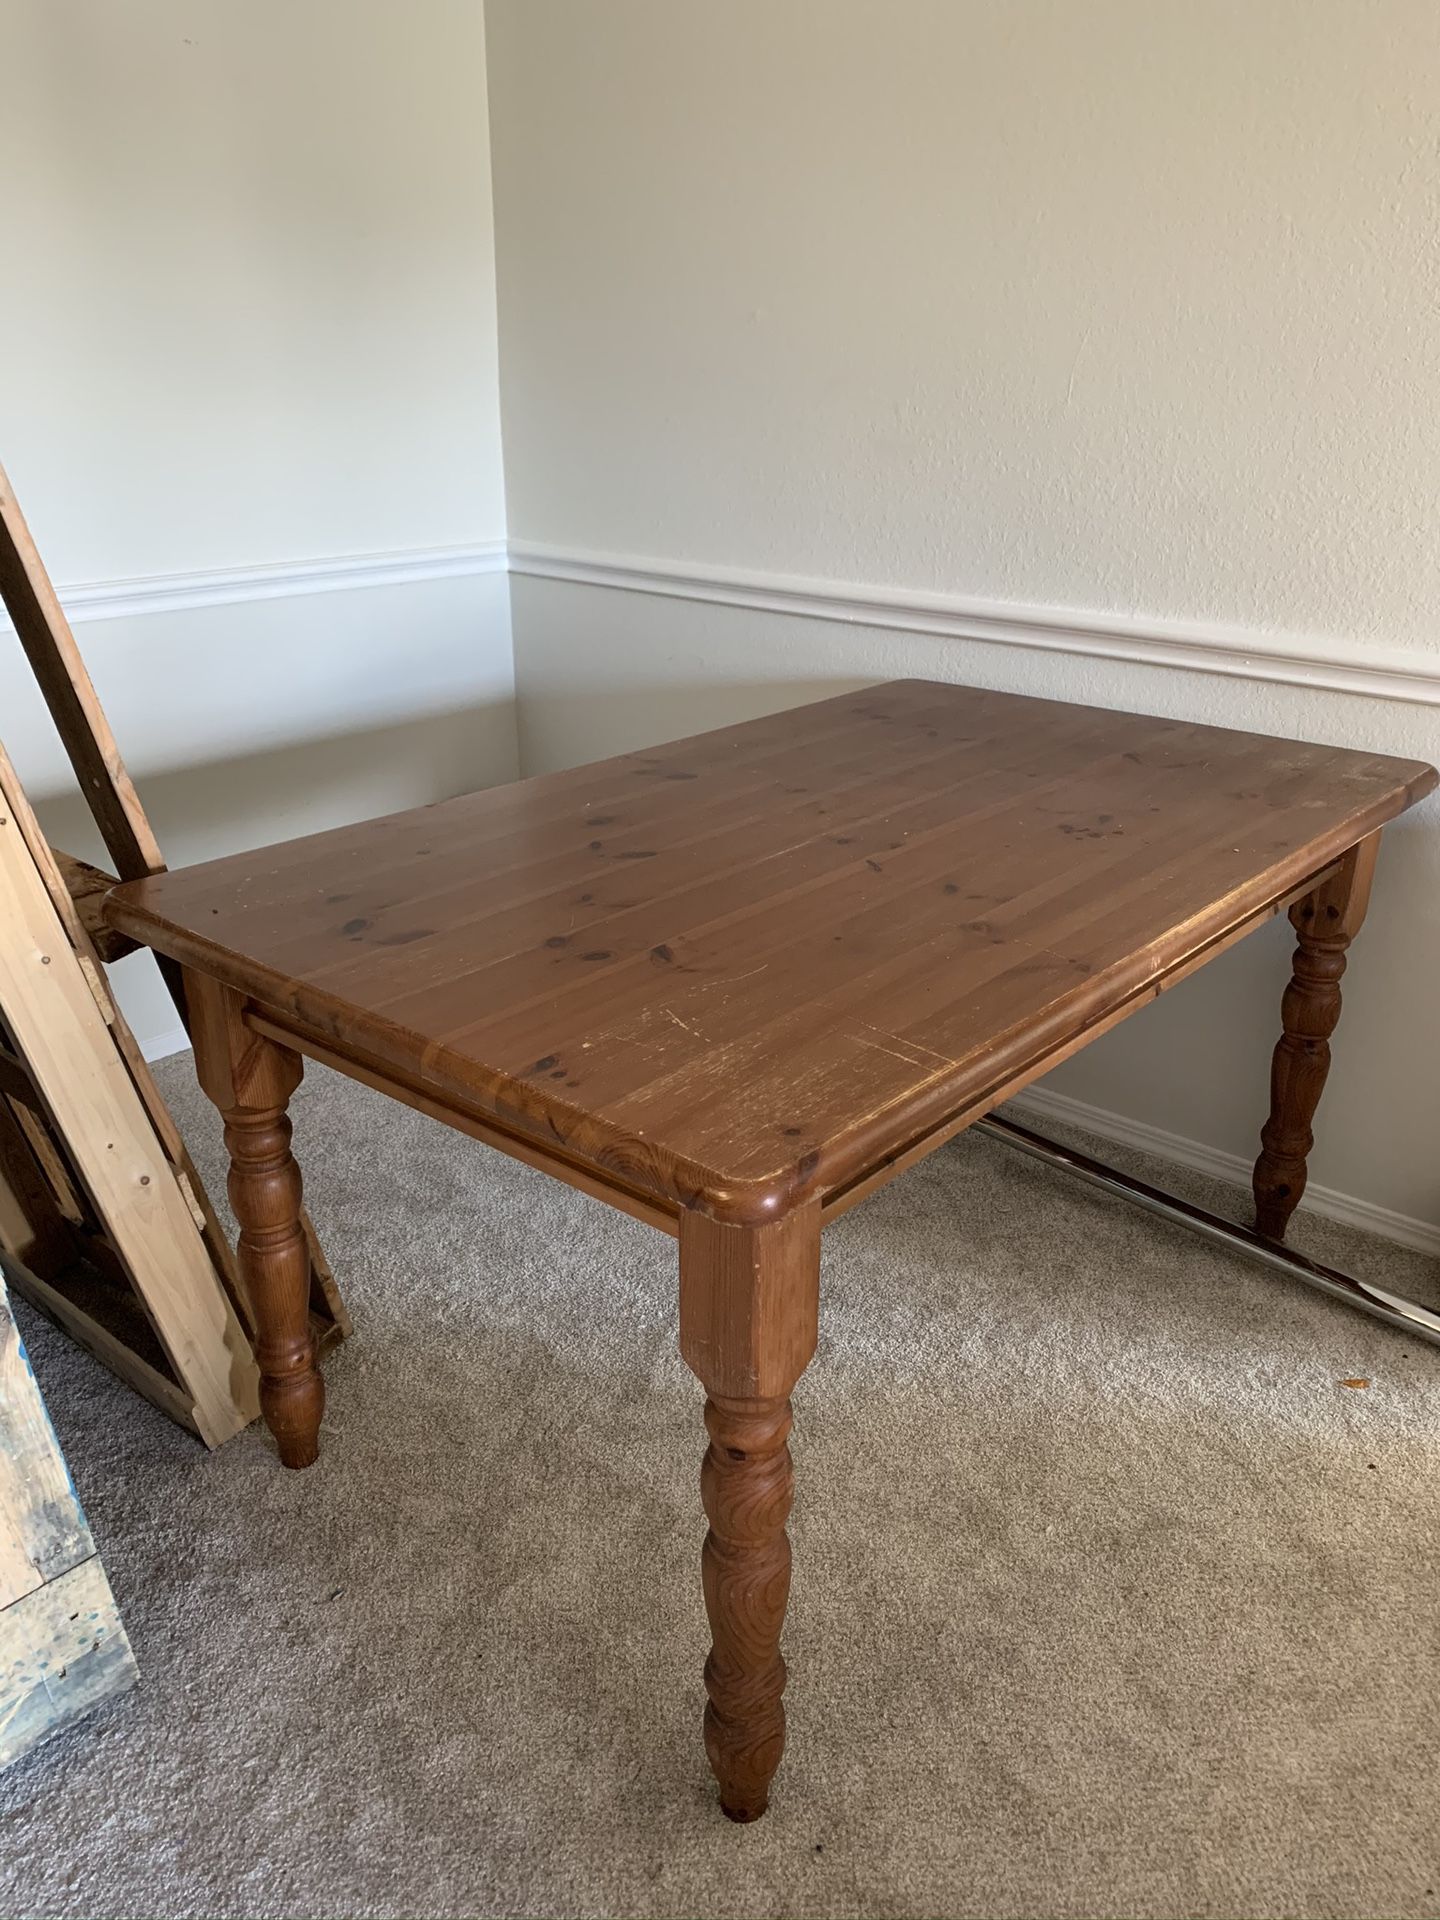 FREE Table - easy to disassemble/must pickup tomorrow 06/3